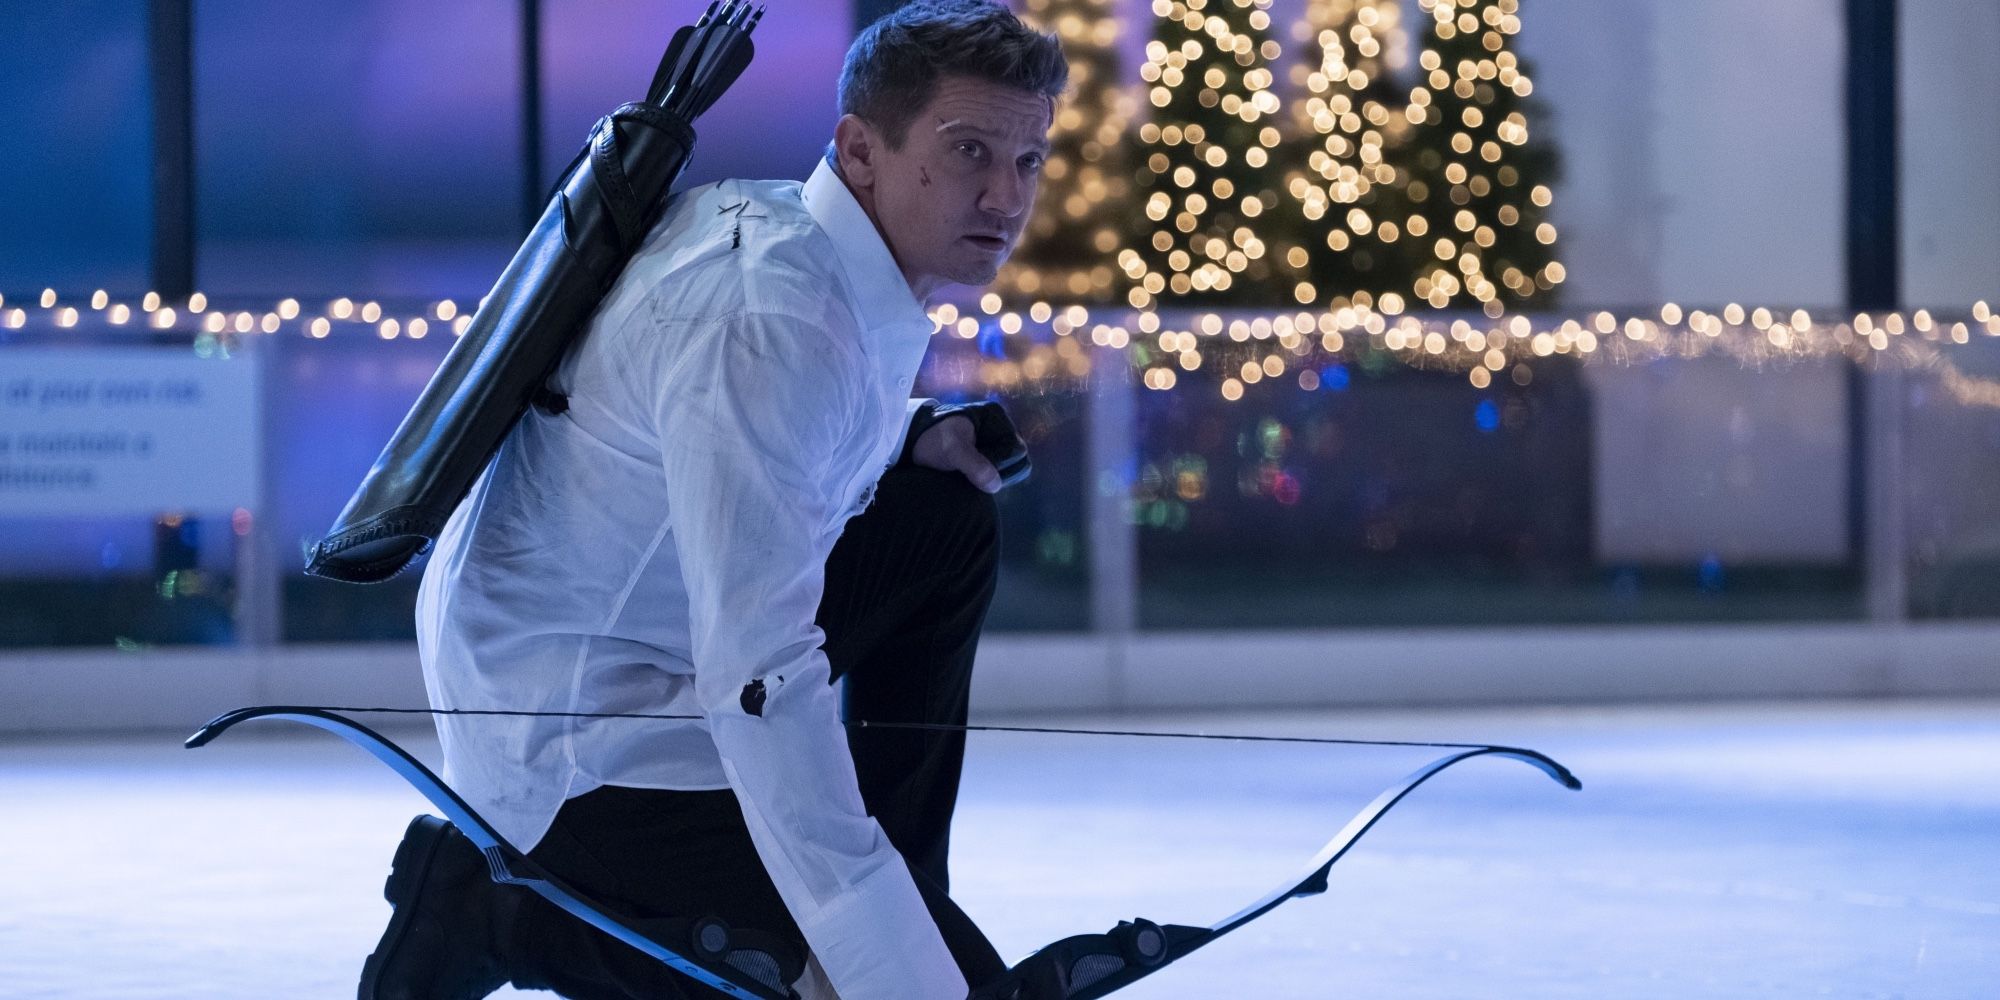 Hawkeye kneeling on an ice ring while looking to the distance in the show Hawkeye.